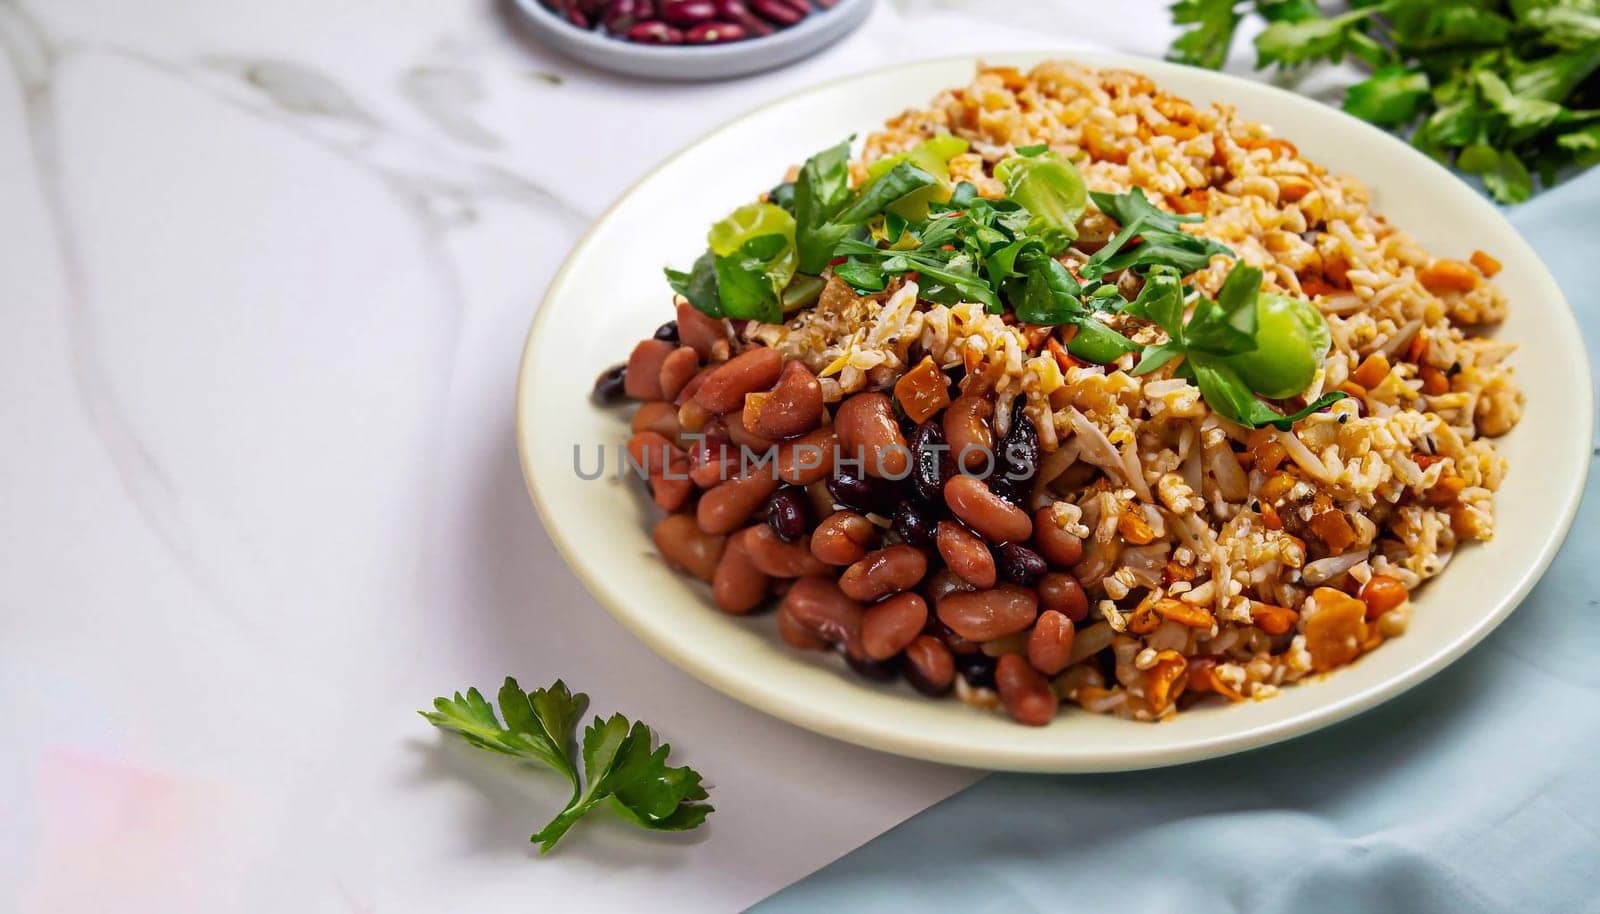 Pan-fried shrimp and blend of couscous, orzo, garbanzo beans, and red quinoa served with green peas and green onion close up on a plate on white background